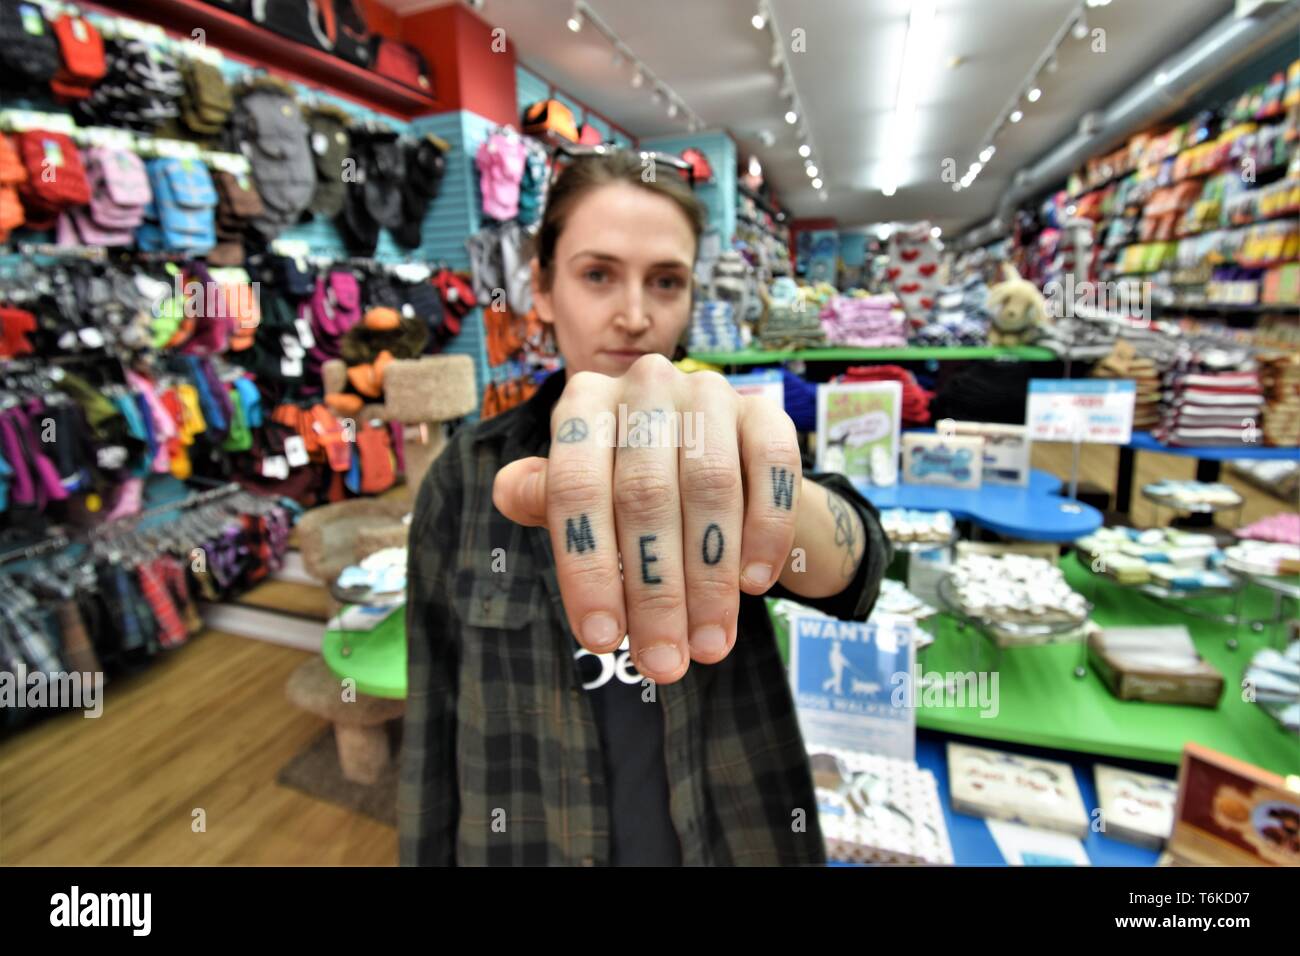 Real young sales person Woman in pet store with MEOW tattooed on her hands where supplies for dogs and cats are sold Stock Photo